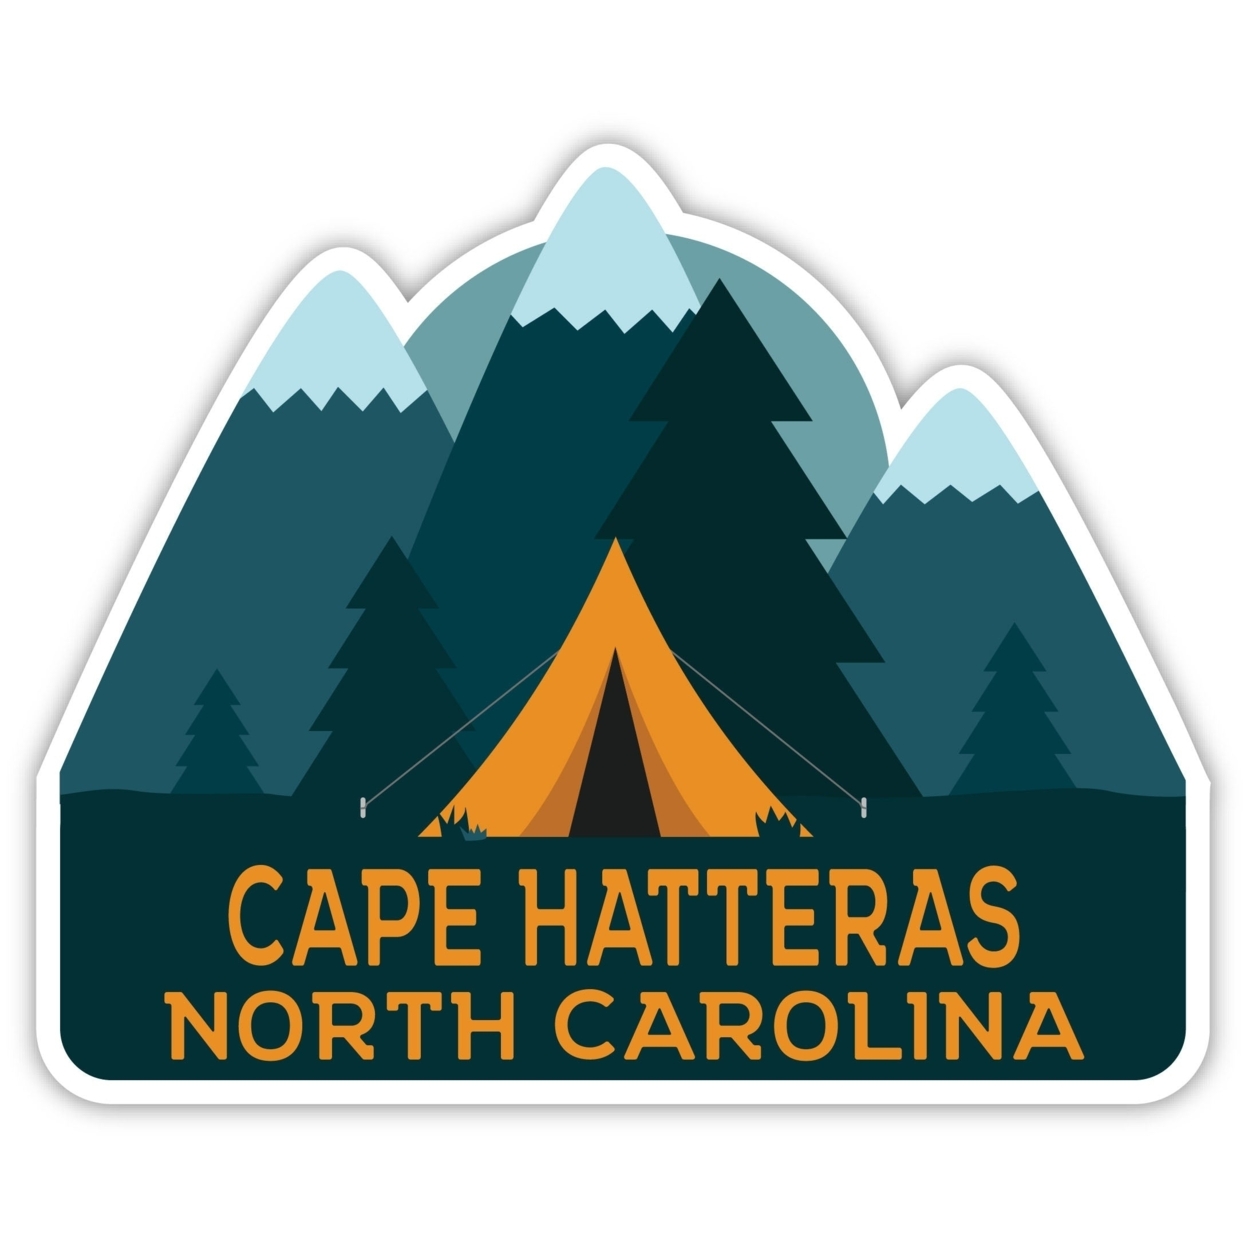 Cape Hatteras North Carolina Souvenir Decorative Stickers (Choose Theme And Size) - 4-Pack, 4-Inch, Tent